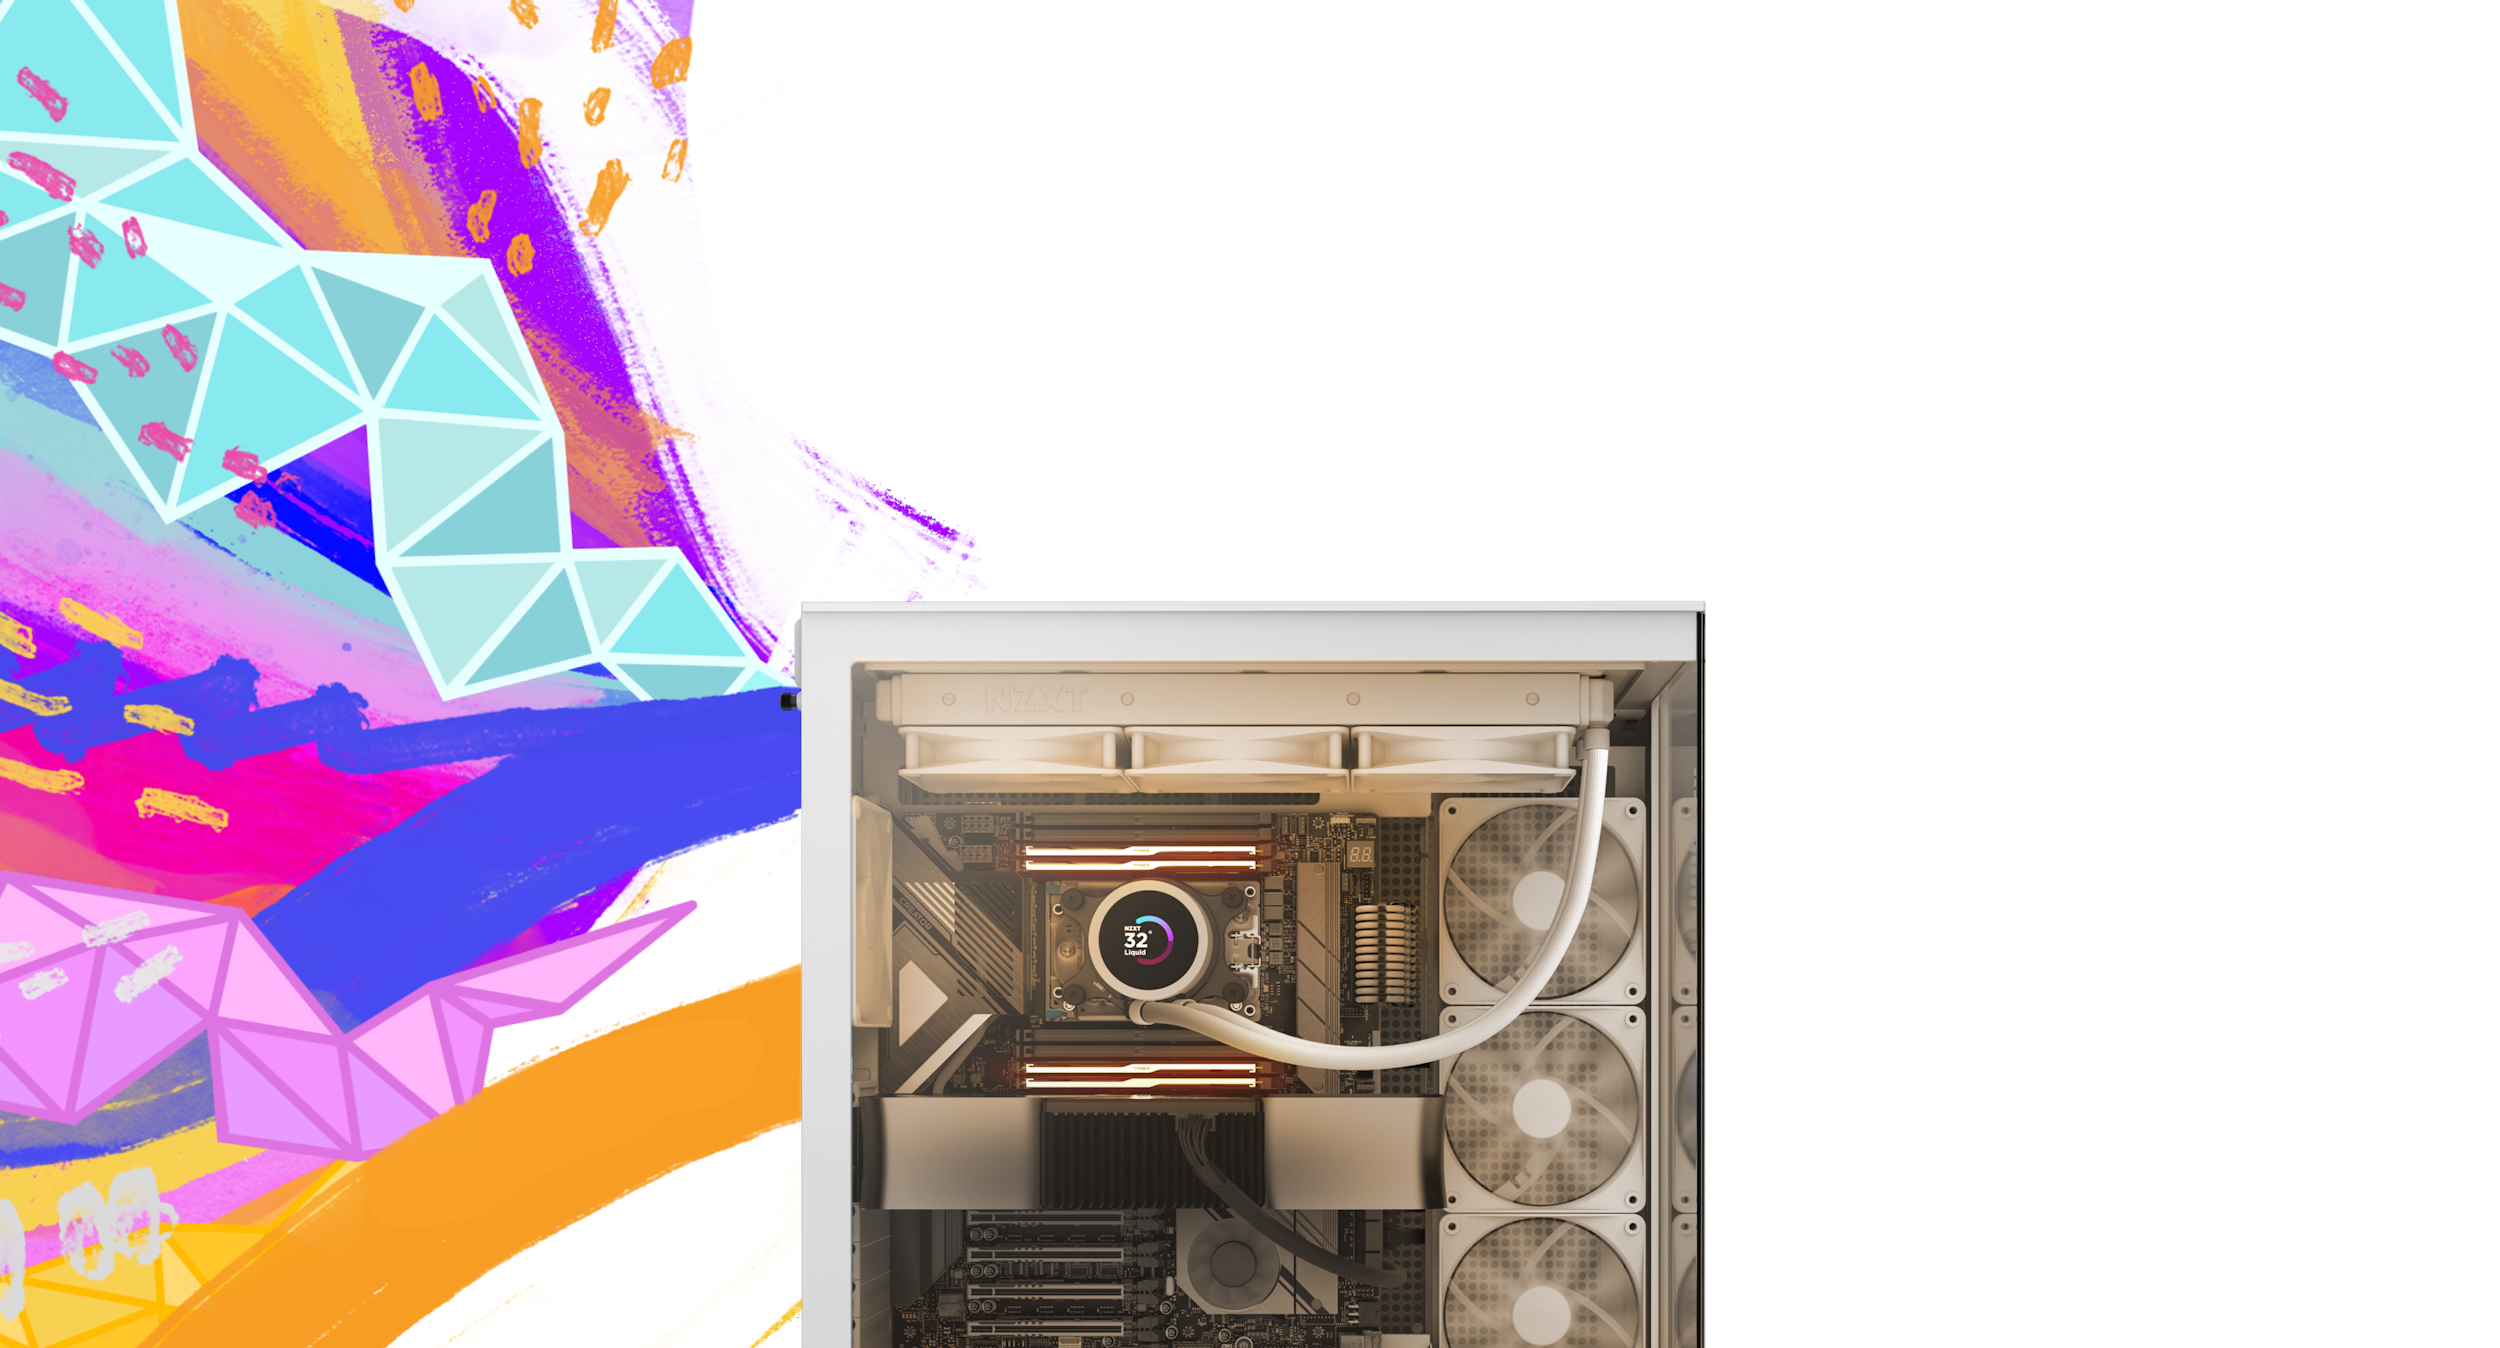 NZXT Creator PC with Colorful Shapes